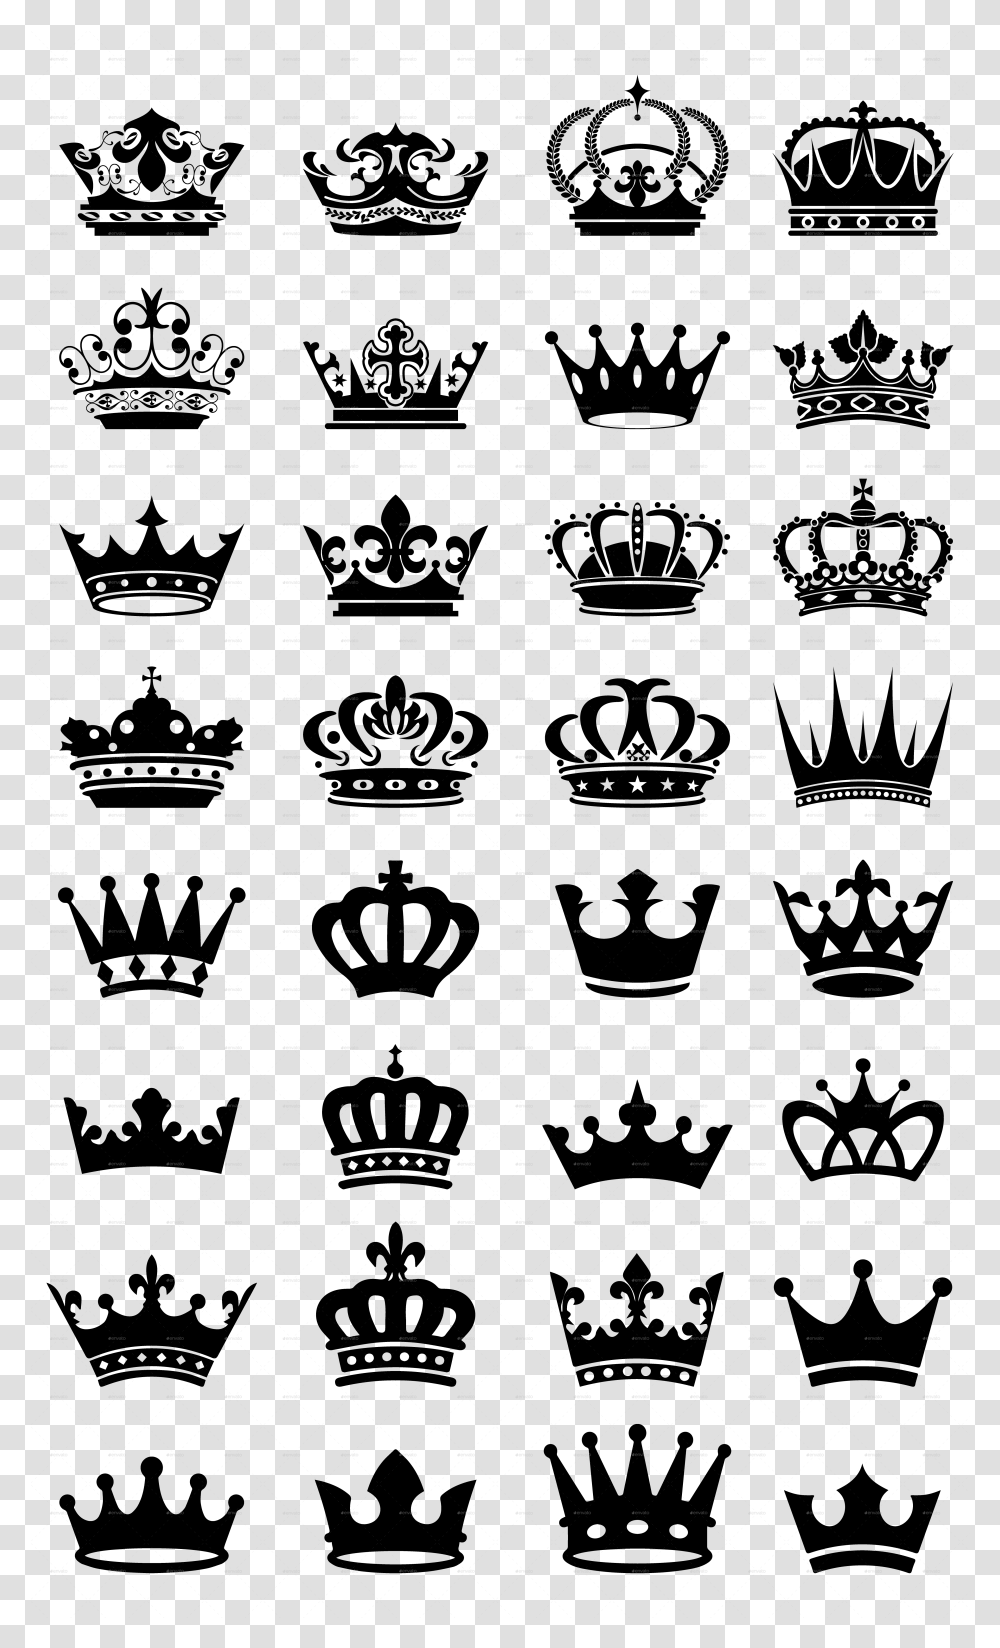 Royal Black Crowns Black Crowns Crown Black And White, Outer Space, Astronomy, Rug, Texture Transparent Png